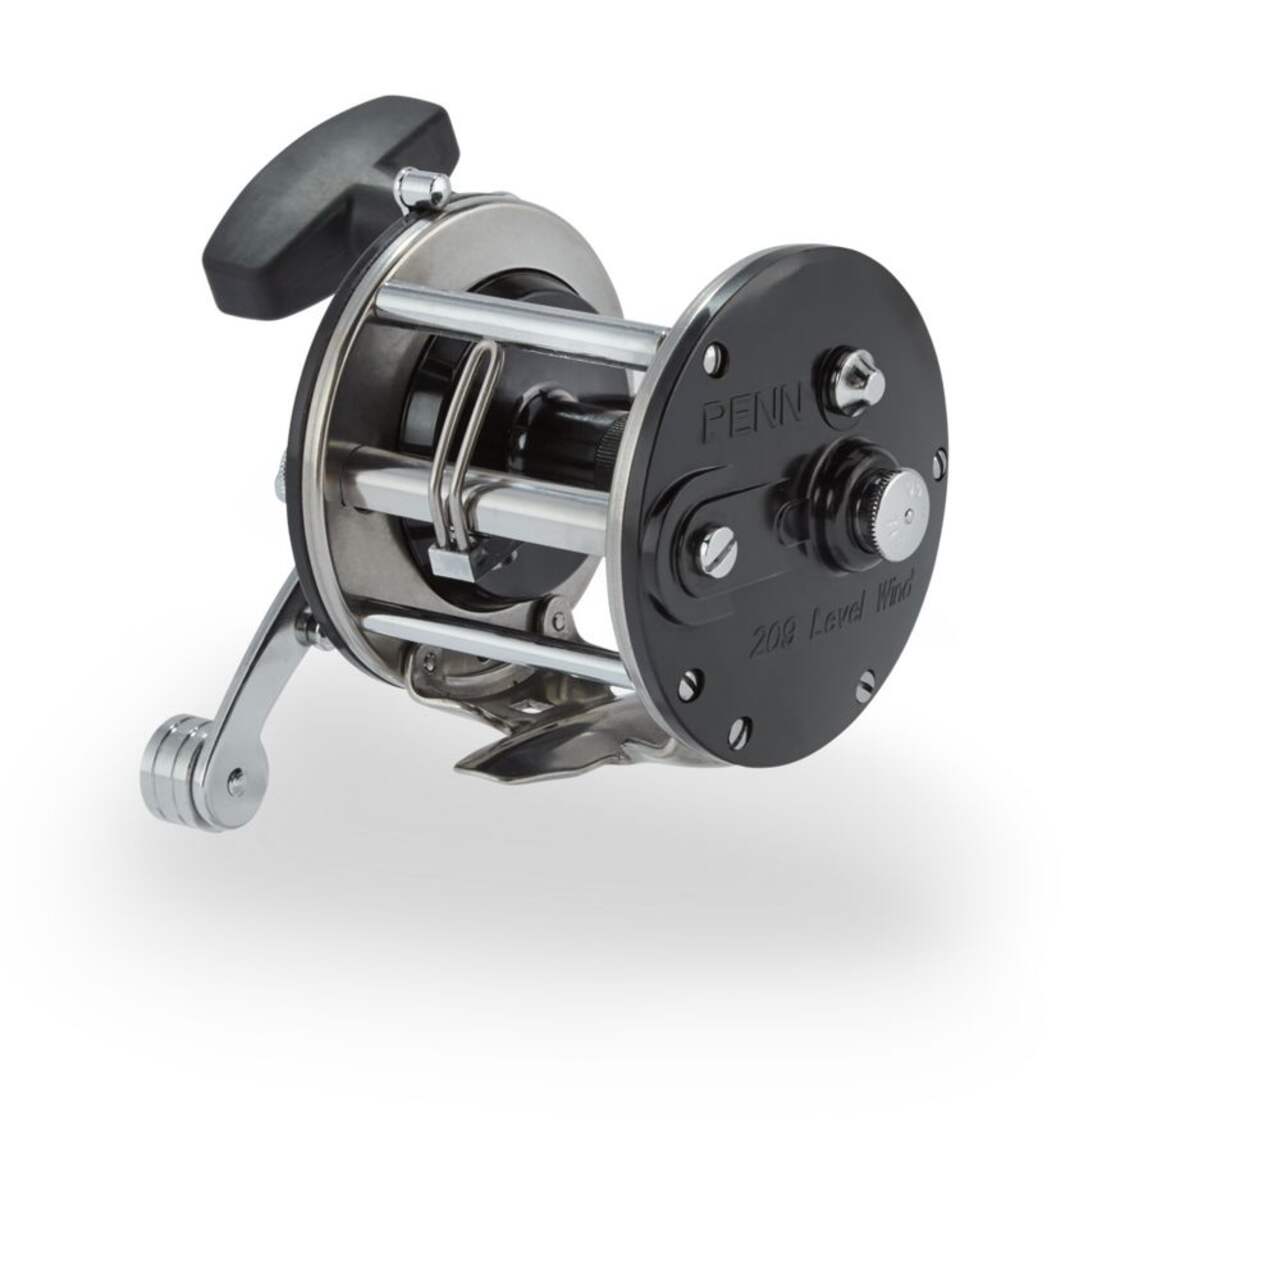 Penn 209 Saltwater Trolling Fishing Reel, Right Hand, Assorted Sizes